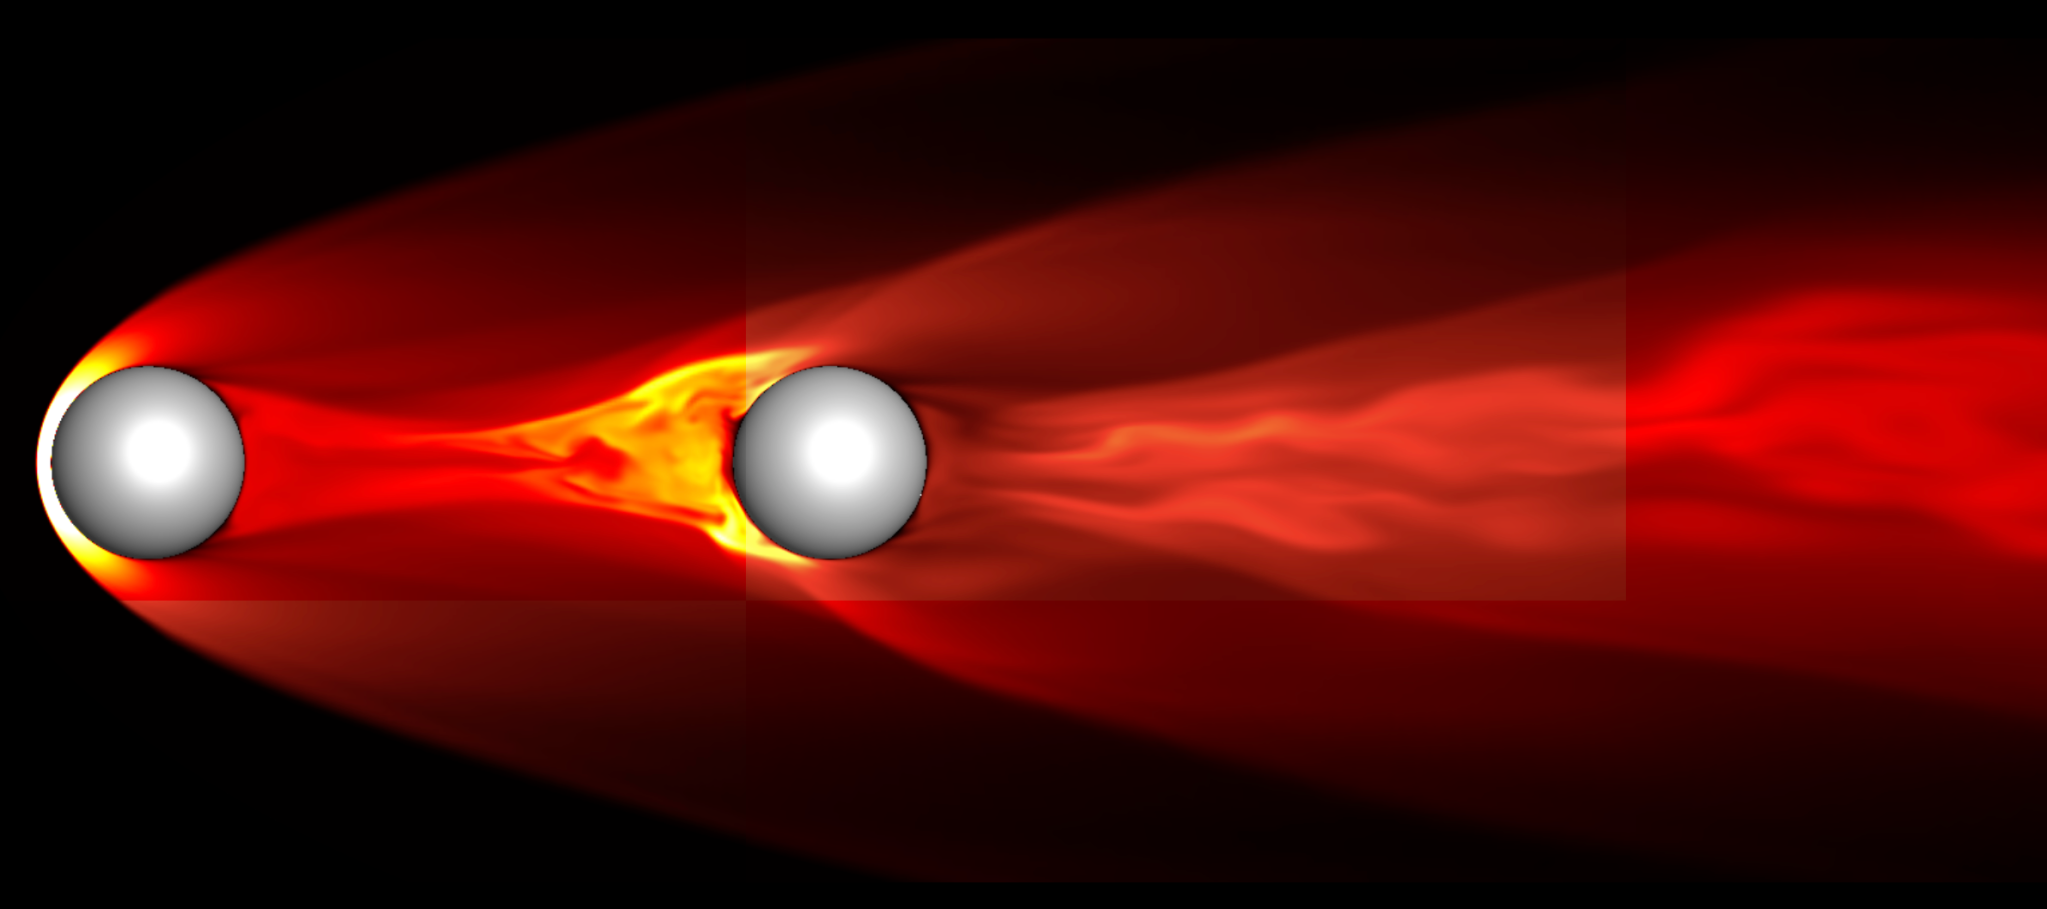 Simulation of two proximate spheres in hypersonic flow.